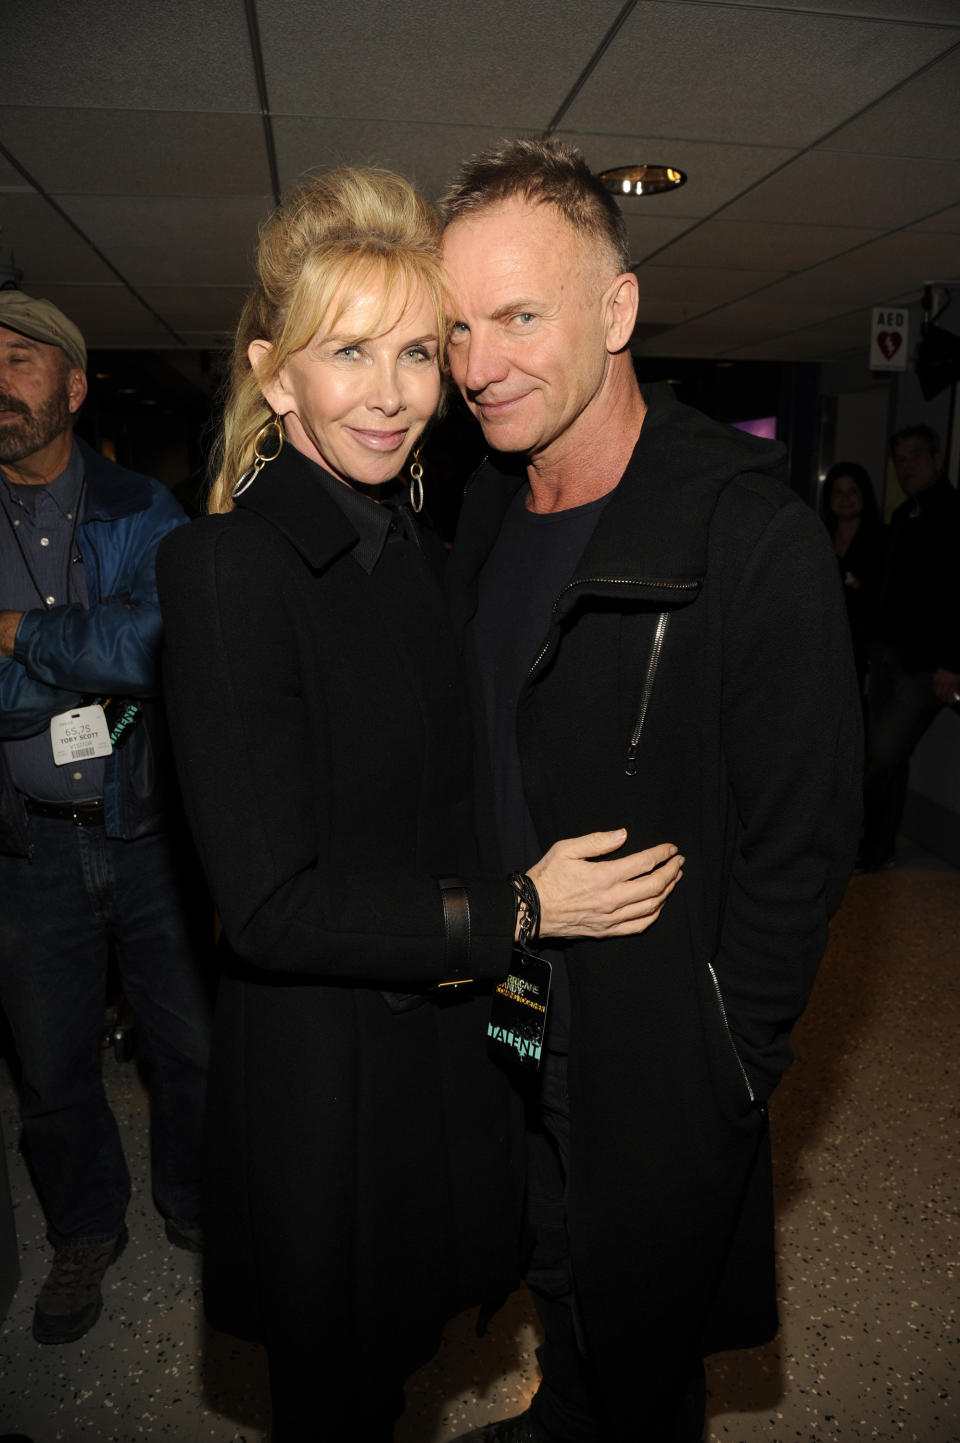 Sting loves to romance his wife Trudie Syler. "There's a playfulness we have; I like the theater of sex," <a href="http://www.harpersbazaar.com/fashion/fashion-articles/sting-trudie-styler-interview-0211?click=main_sr">he told Harper's Bazaar.</a> "I like to look good. I like her to dress up. I like to dress her up."